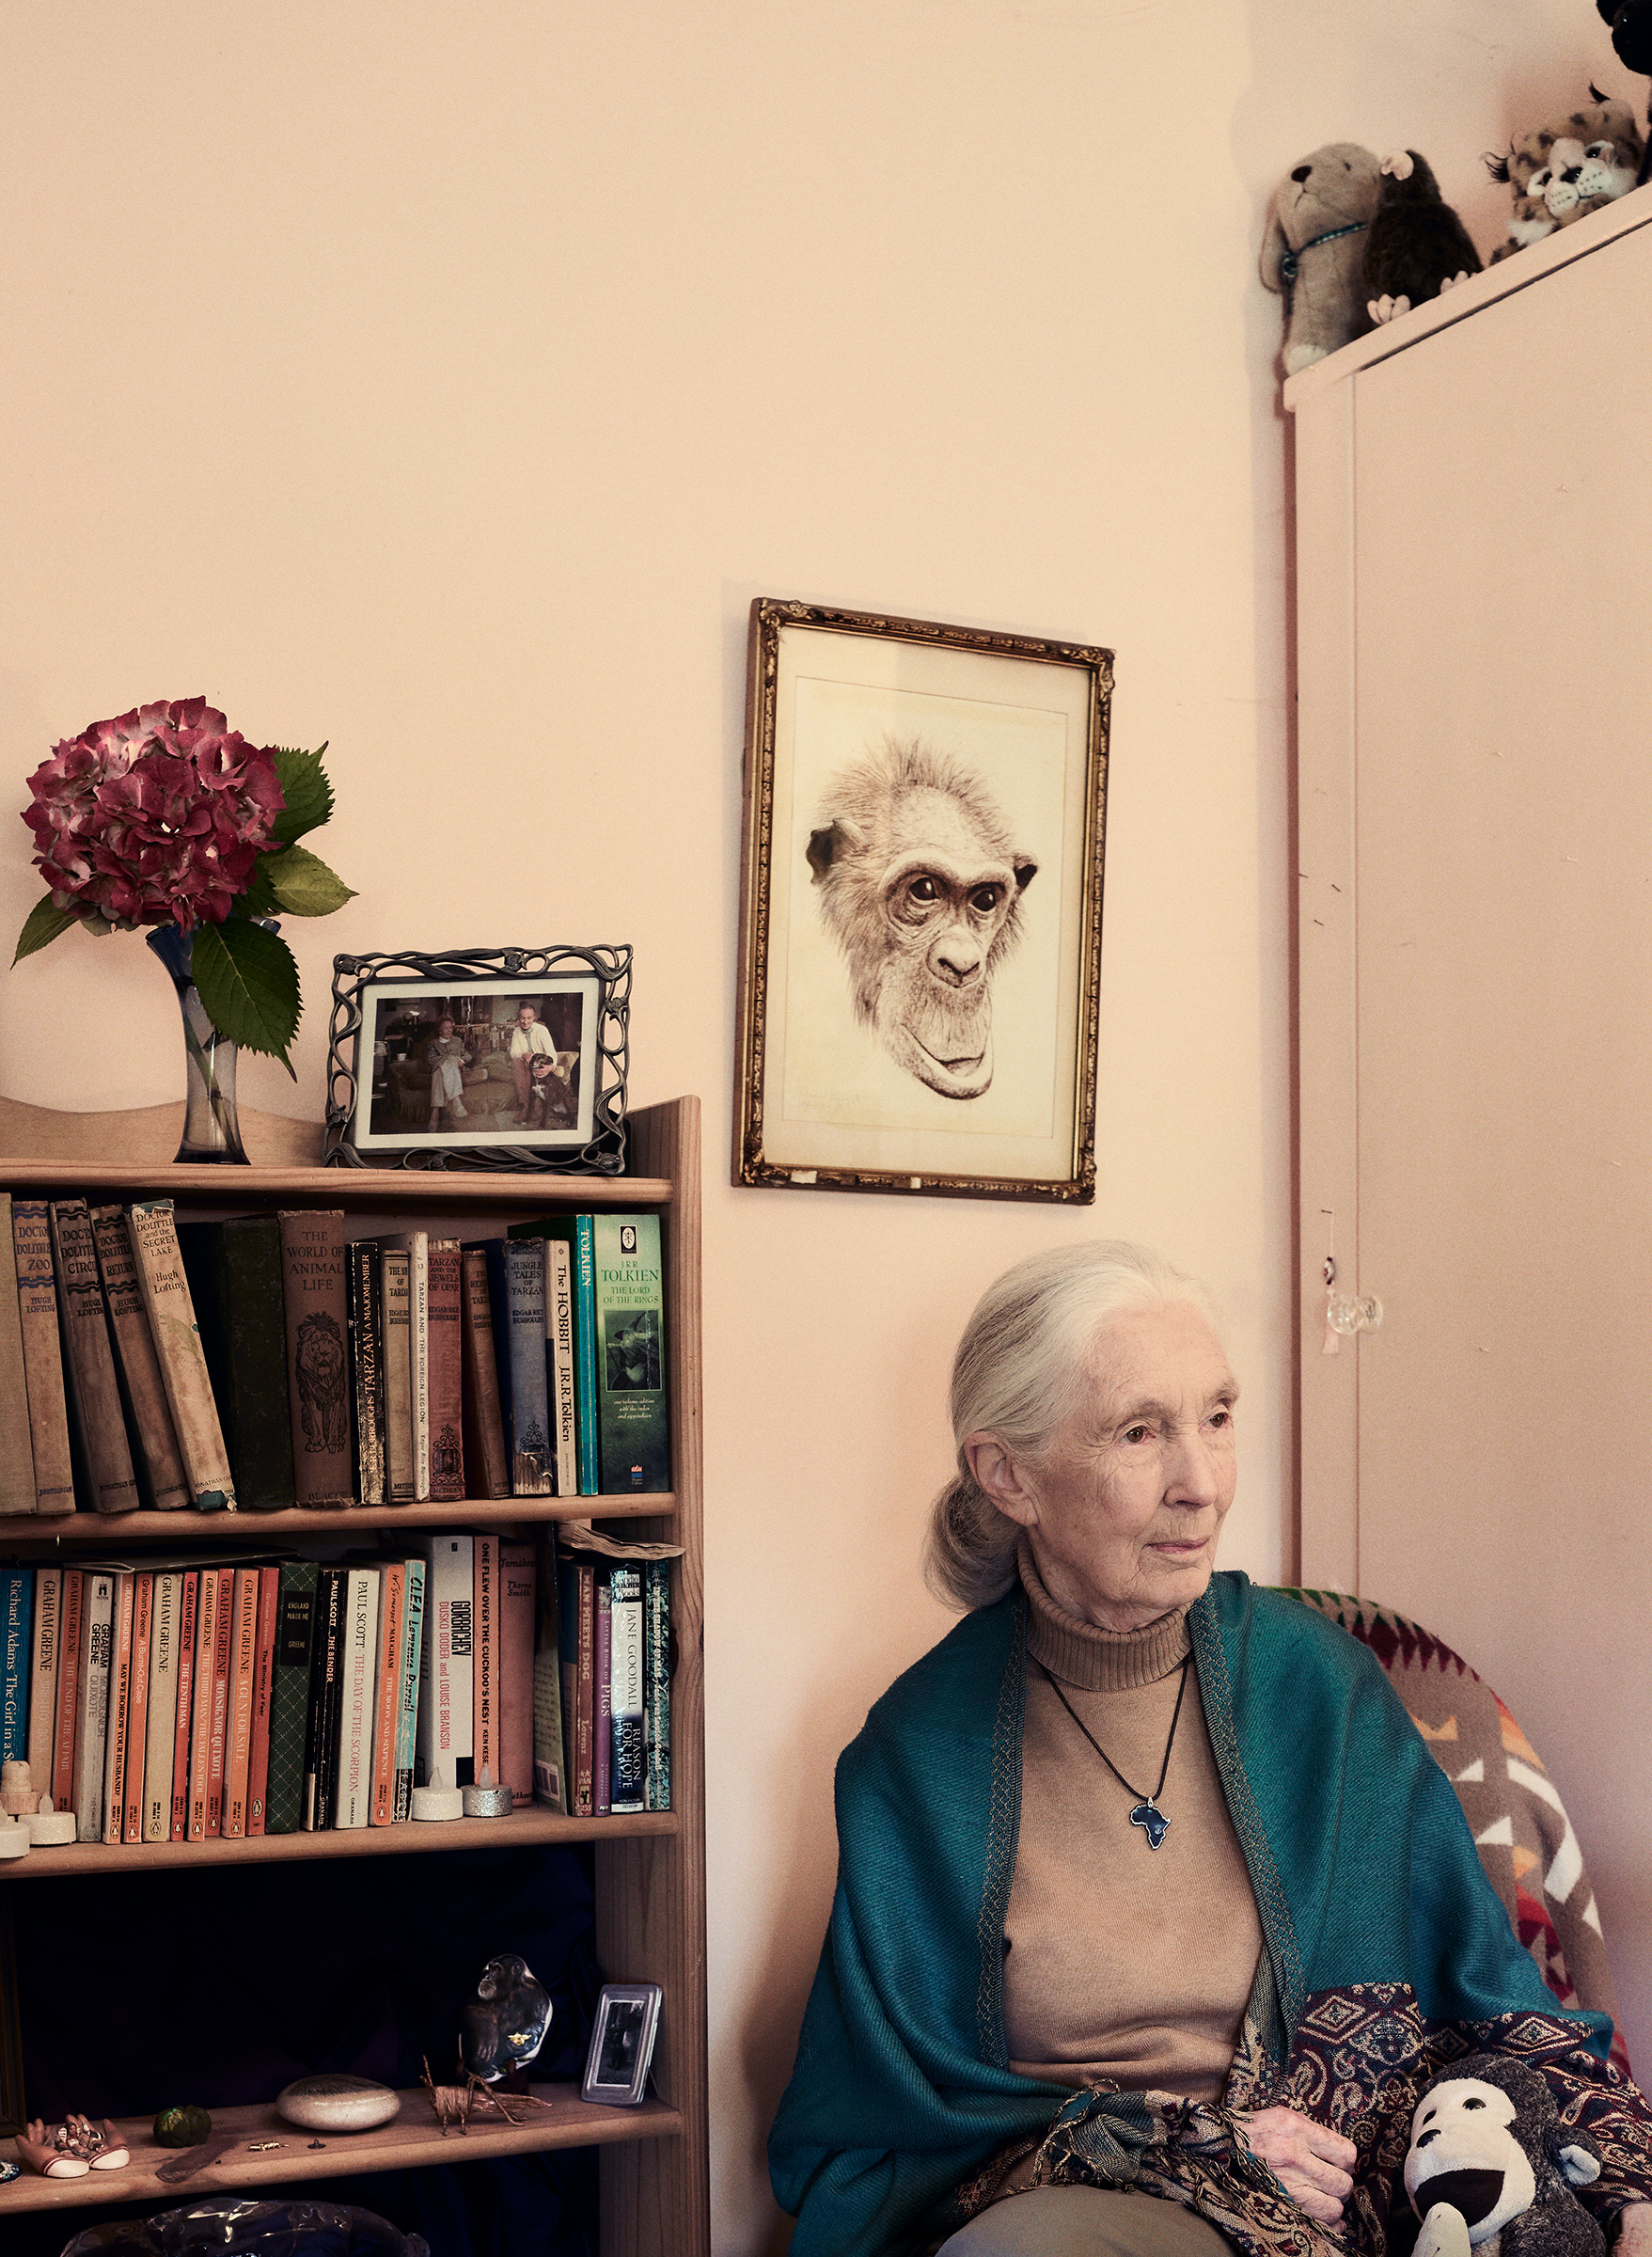 <strong>Jane Goodall</strong>. "<a href="https://time.com/6102640/jane-goodall-environment-hope/">The Enduring Hope of Jane Goodall</a>,"Oct. 11 issue. (Nadav Kander for TIME)